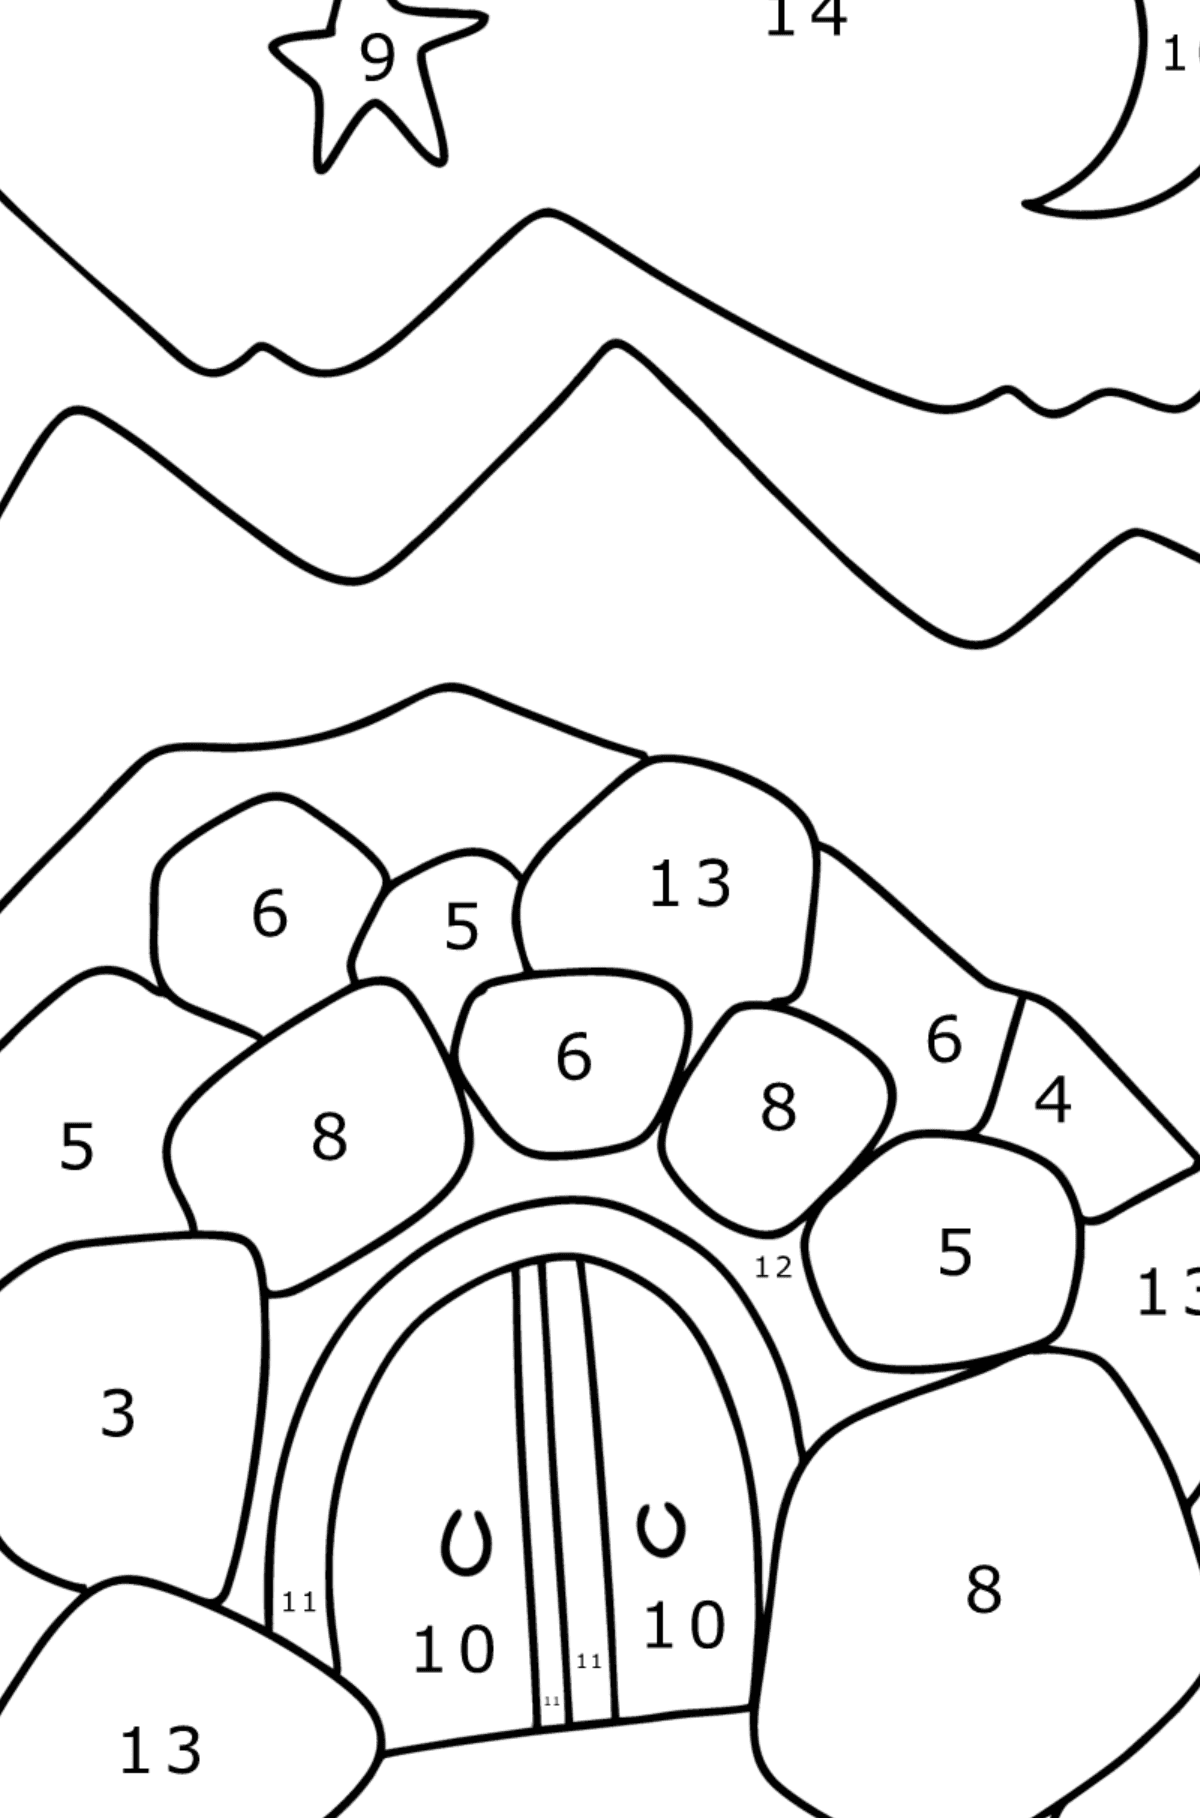 Ali Baba Cave coloring page - Coloring by Numbers for Kids